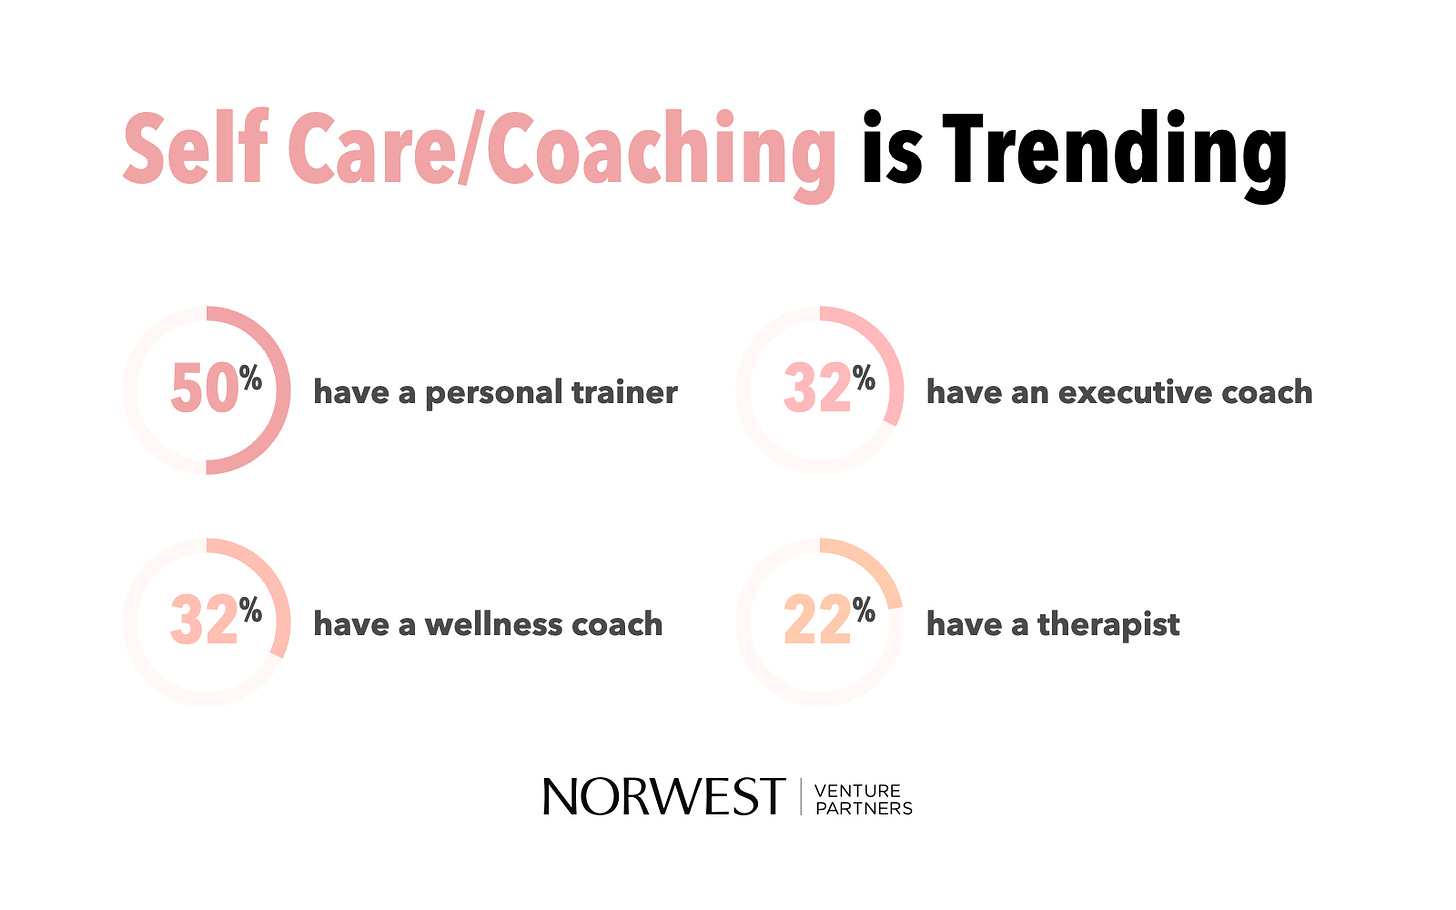 Graphic. Title: “Self Care/Coaching is Trending.” Shows that 50% of founders have a personal trainer, 32% have an executive coach, 32% have a wellness coach, and 22% have a therapist. Source: Norwest Venture Partners.